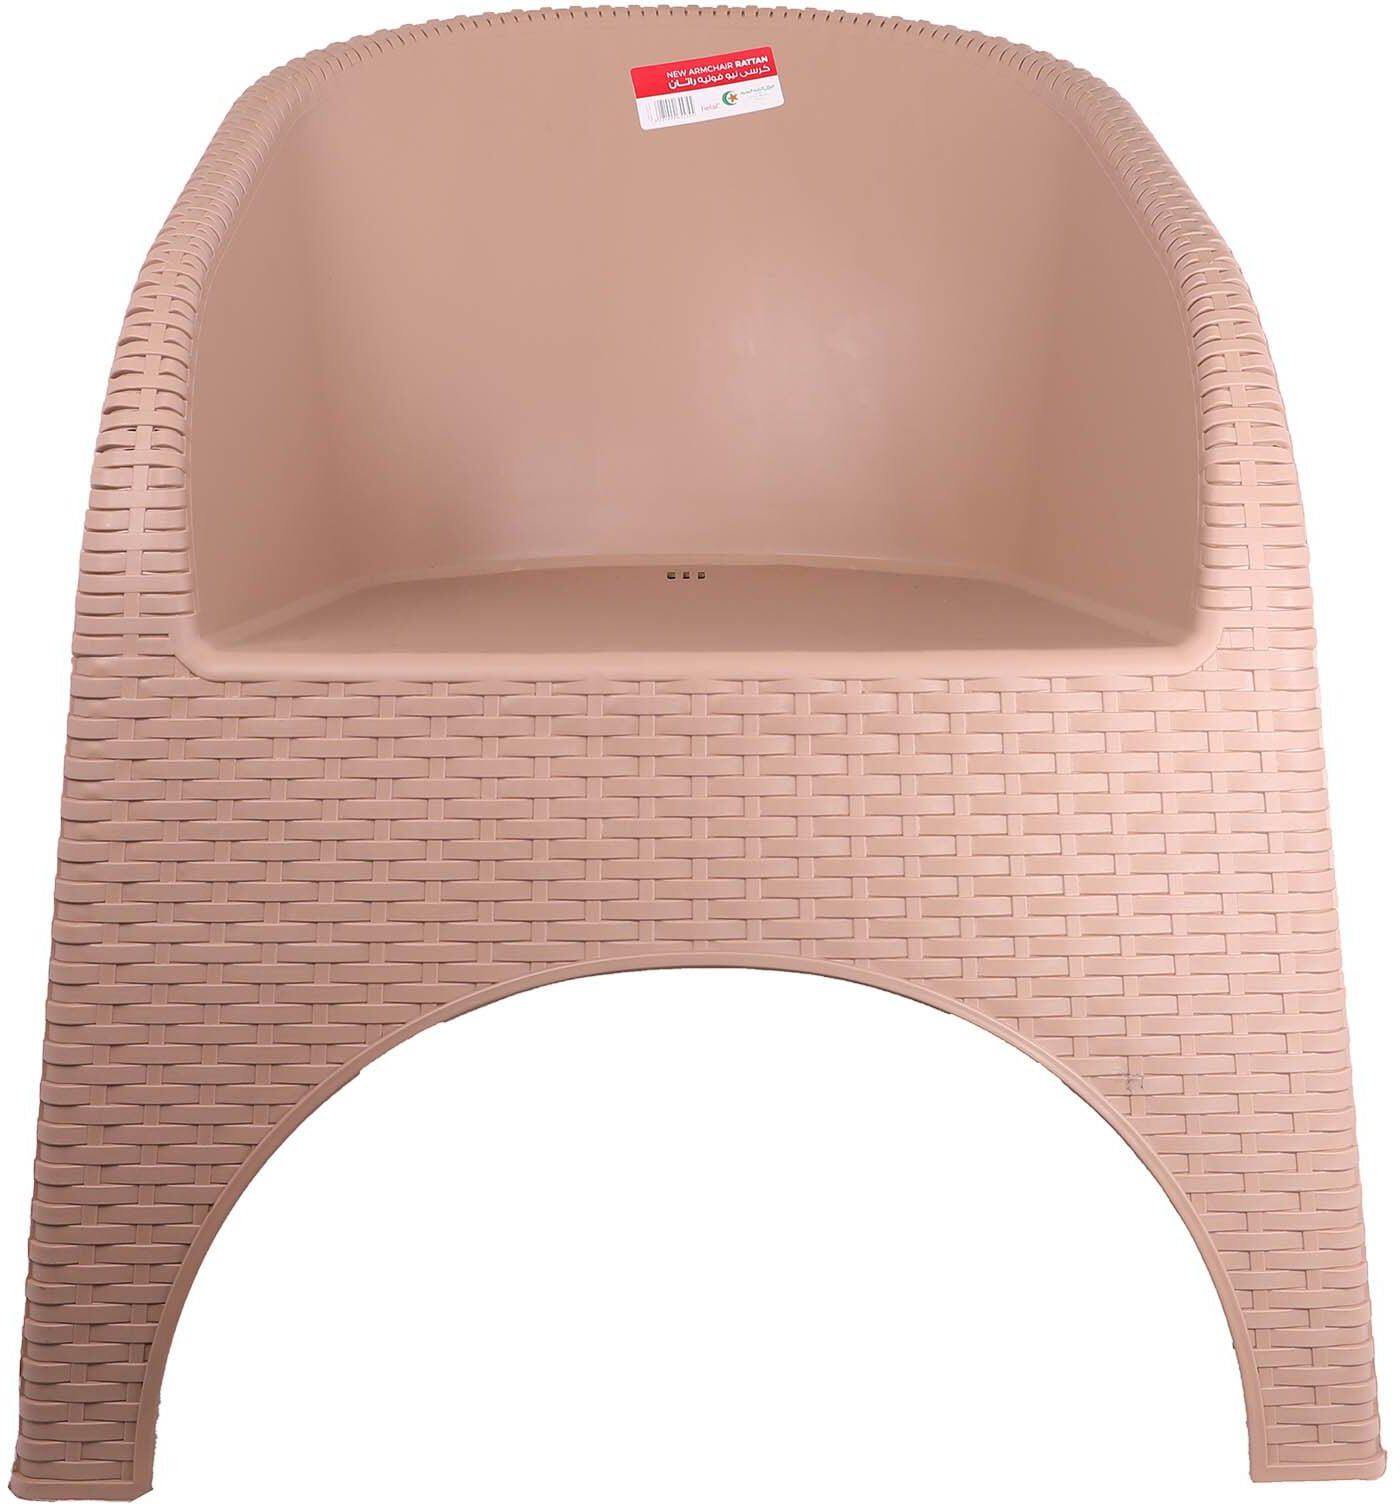 El Helal and Golden Star Arm Chair - Beige